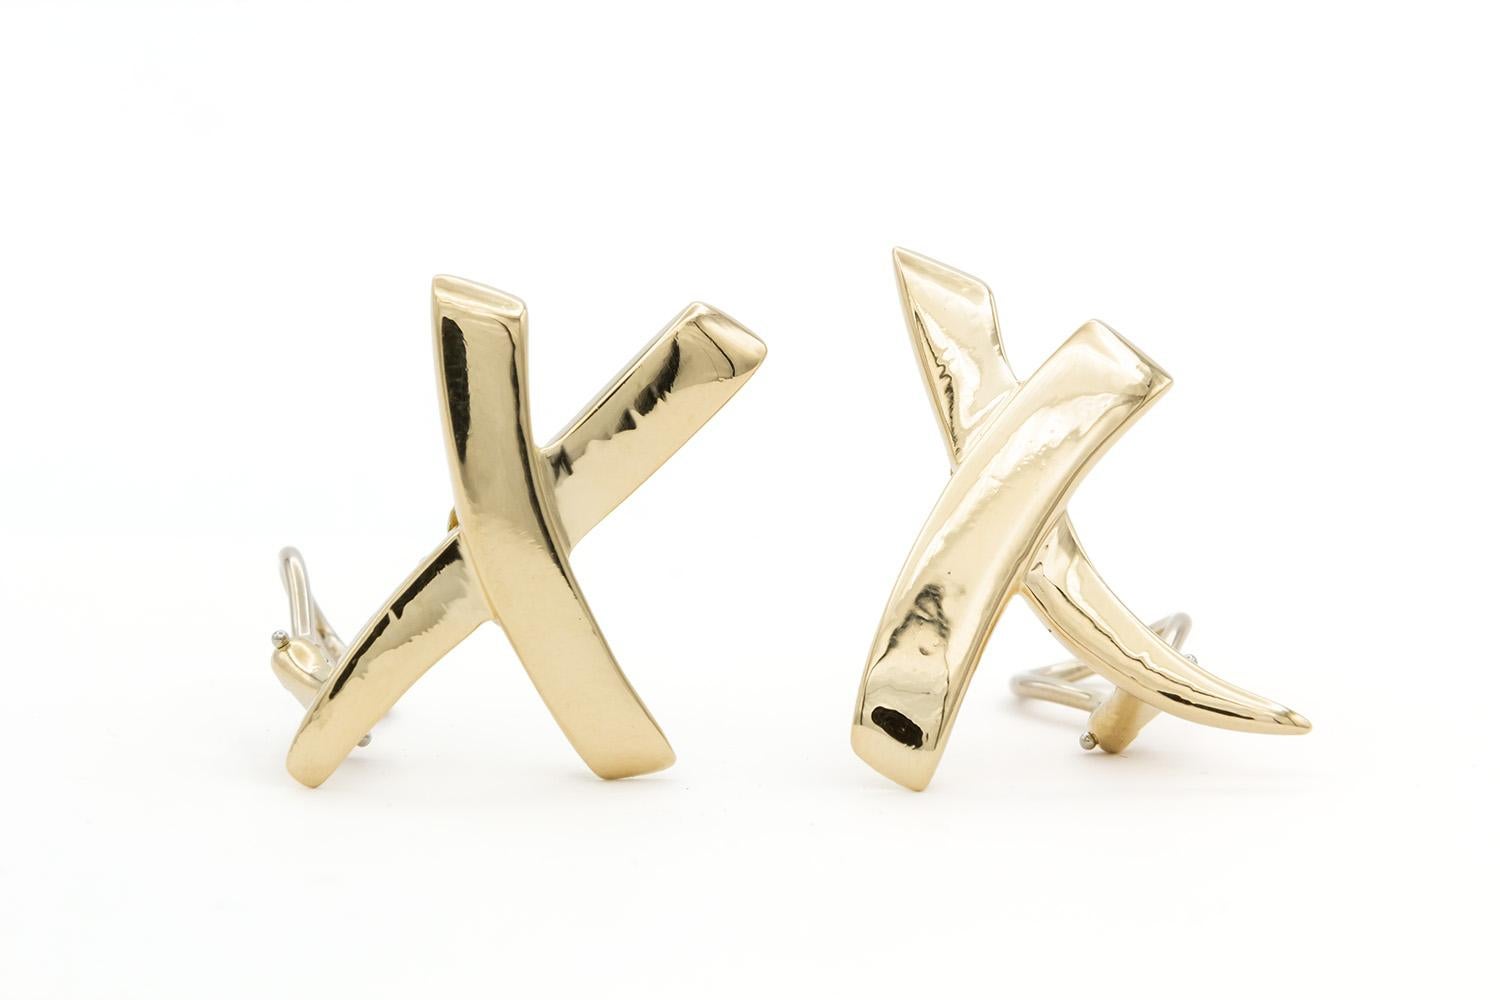 We are  pleased to offer these Tiffany & Co. Paloma Picasso 18k Yellow Gold Graffiti X Kiss Earclip Earrings. Paloma Picasso is one of the most celebrated designers at Tiffany & Co. her creative use of materials and designs stands the test of time.